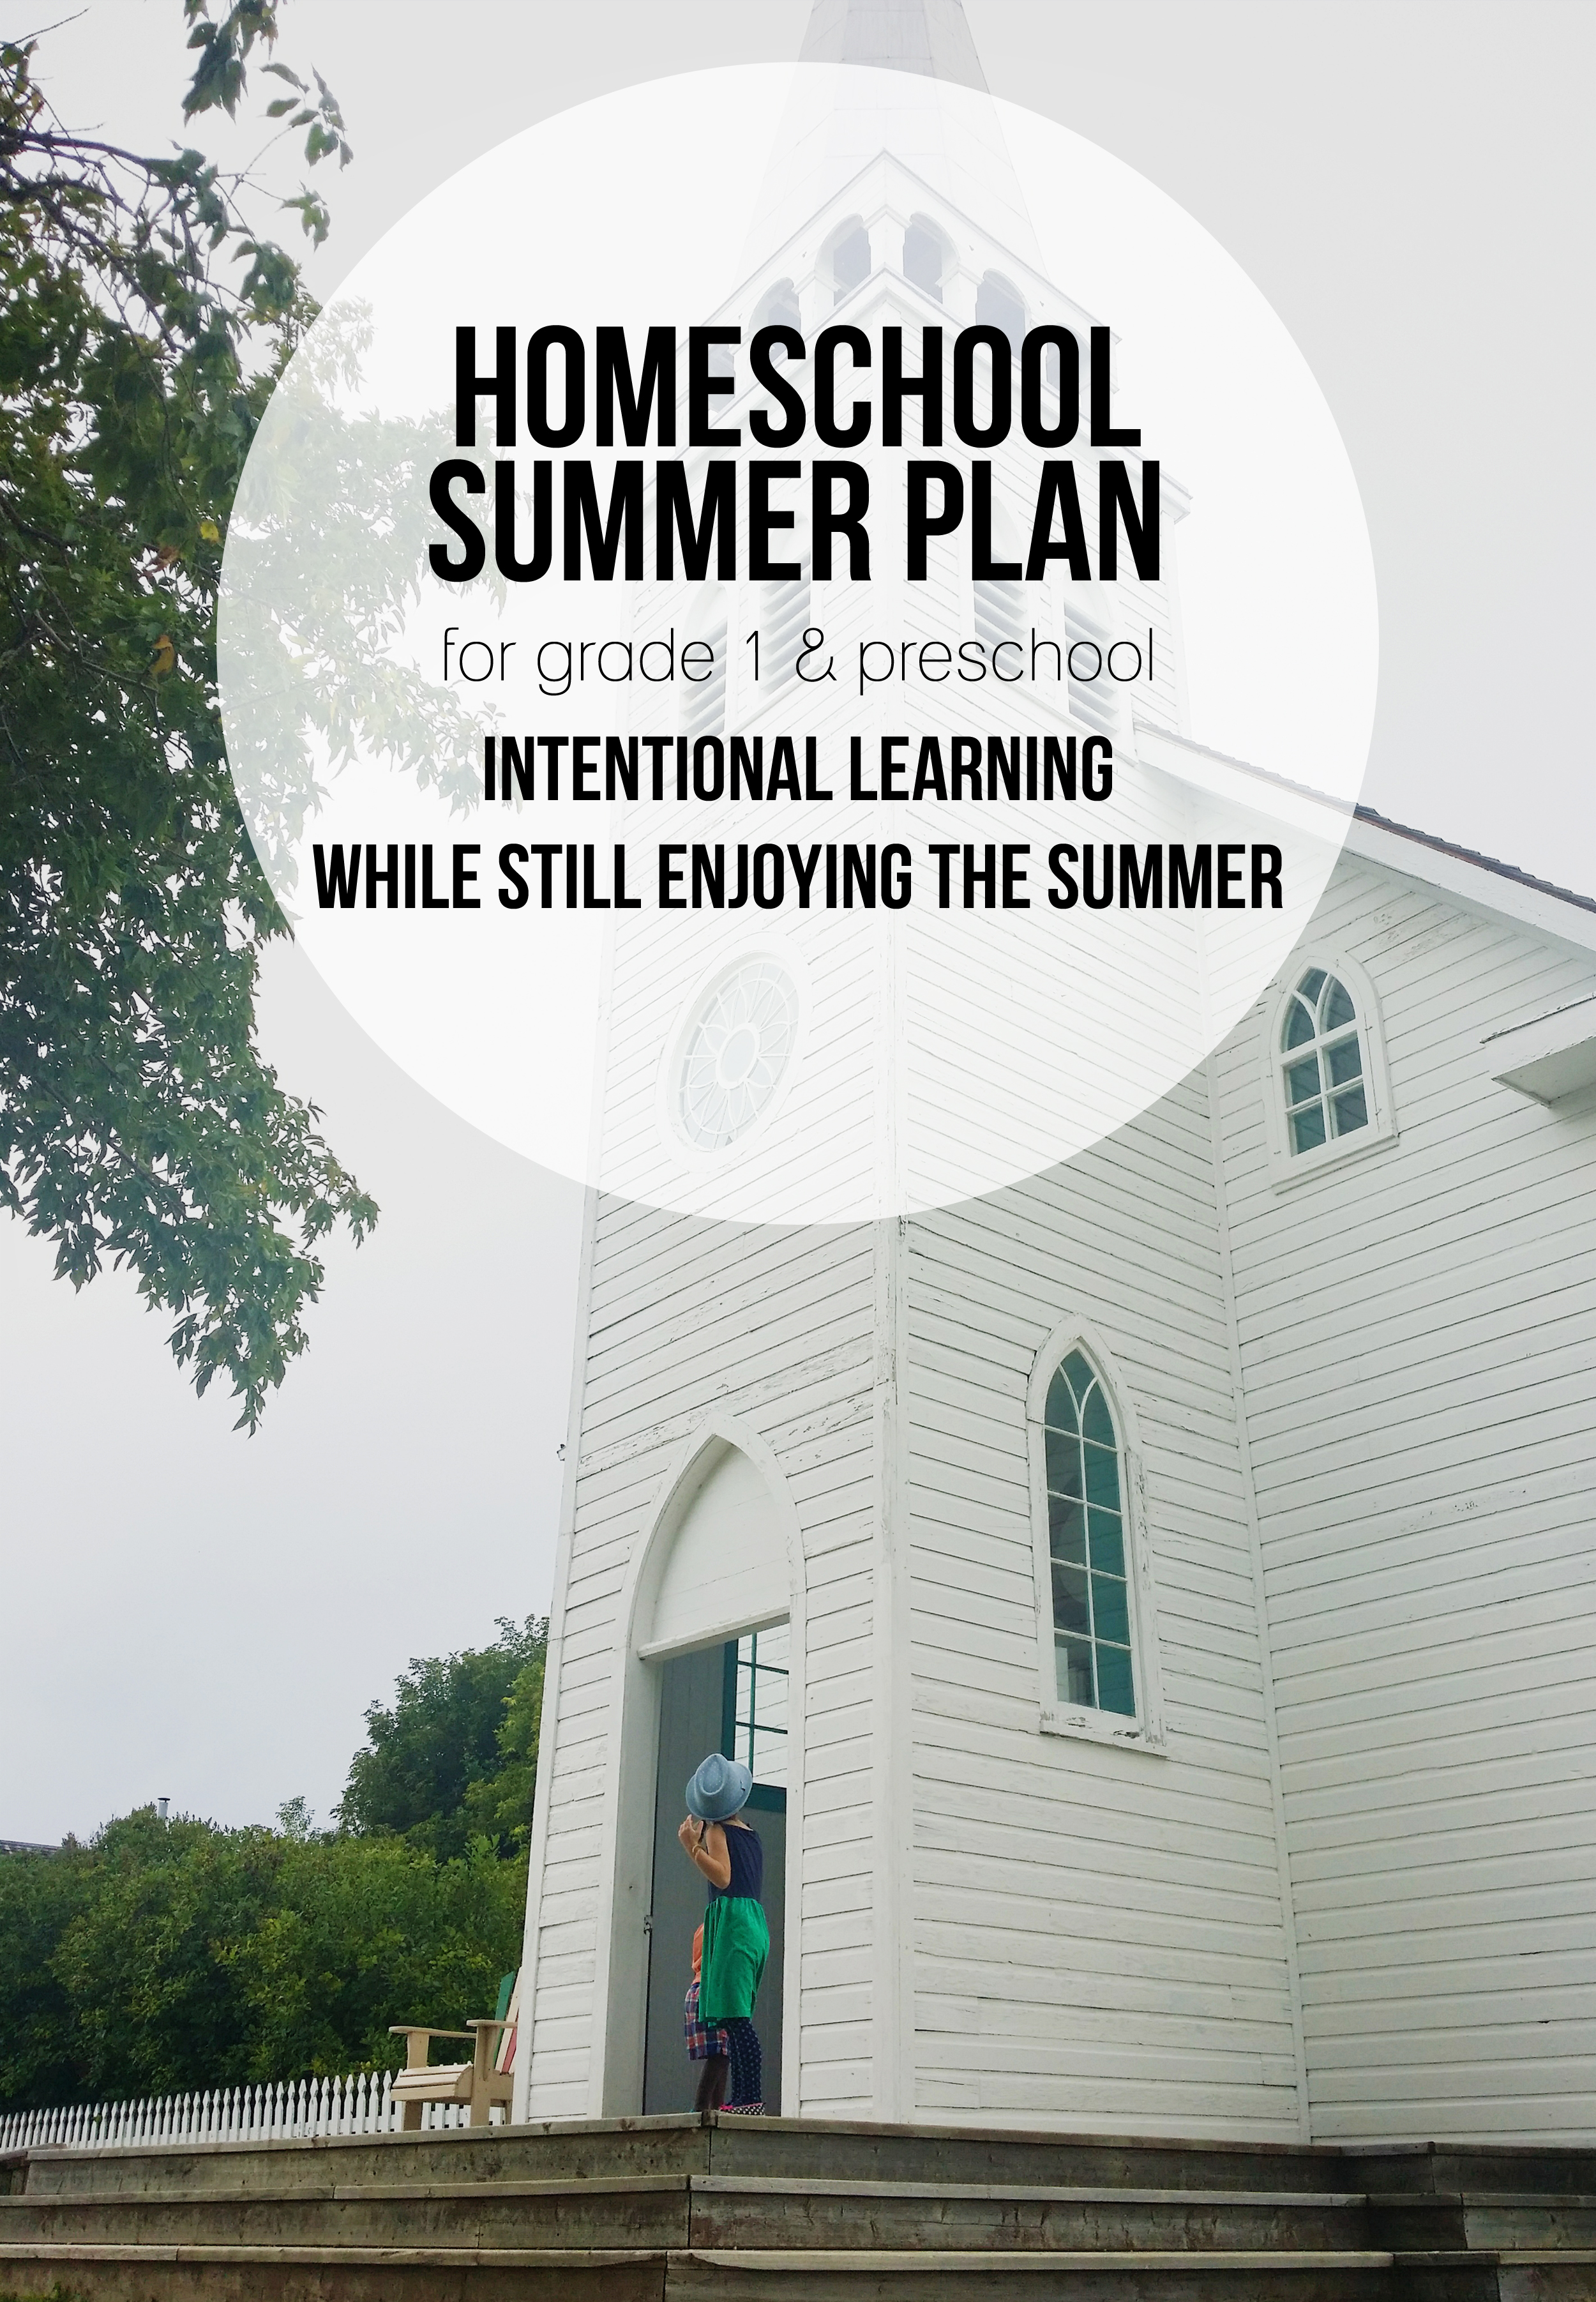 You can enjoy the summer and still have a bit of a homeschool summer plan. Here's ours which covers Bible, language arts, science, math, history & geography and music. Oh, and a little bit for the preschooler in there.